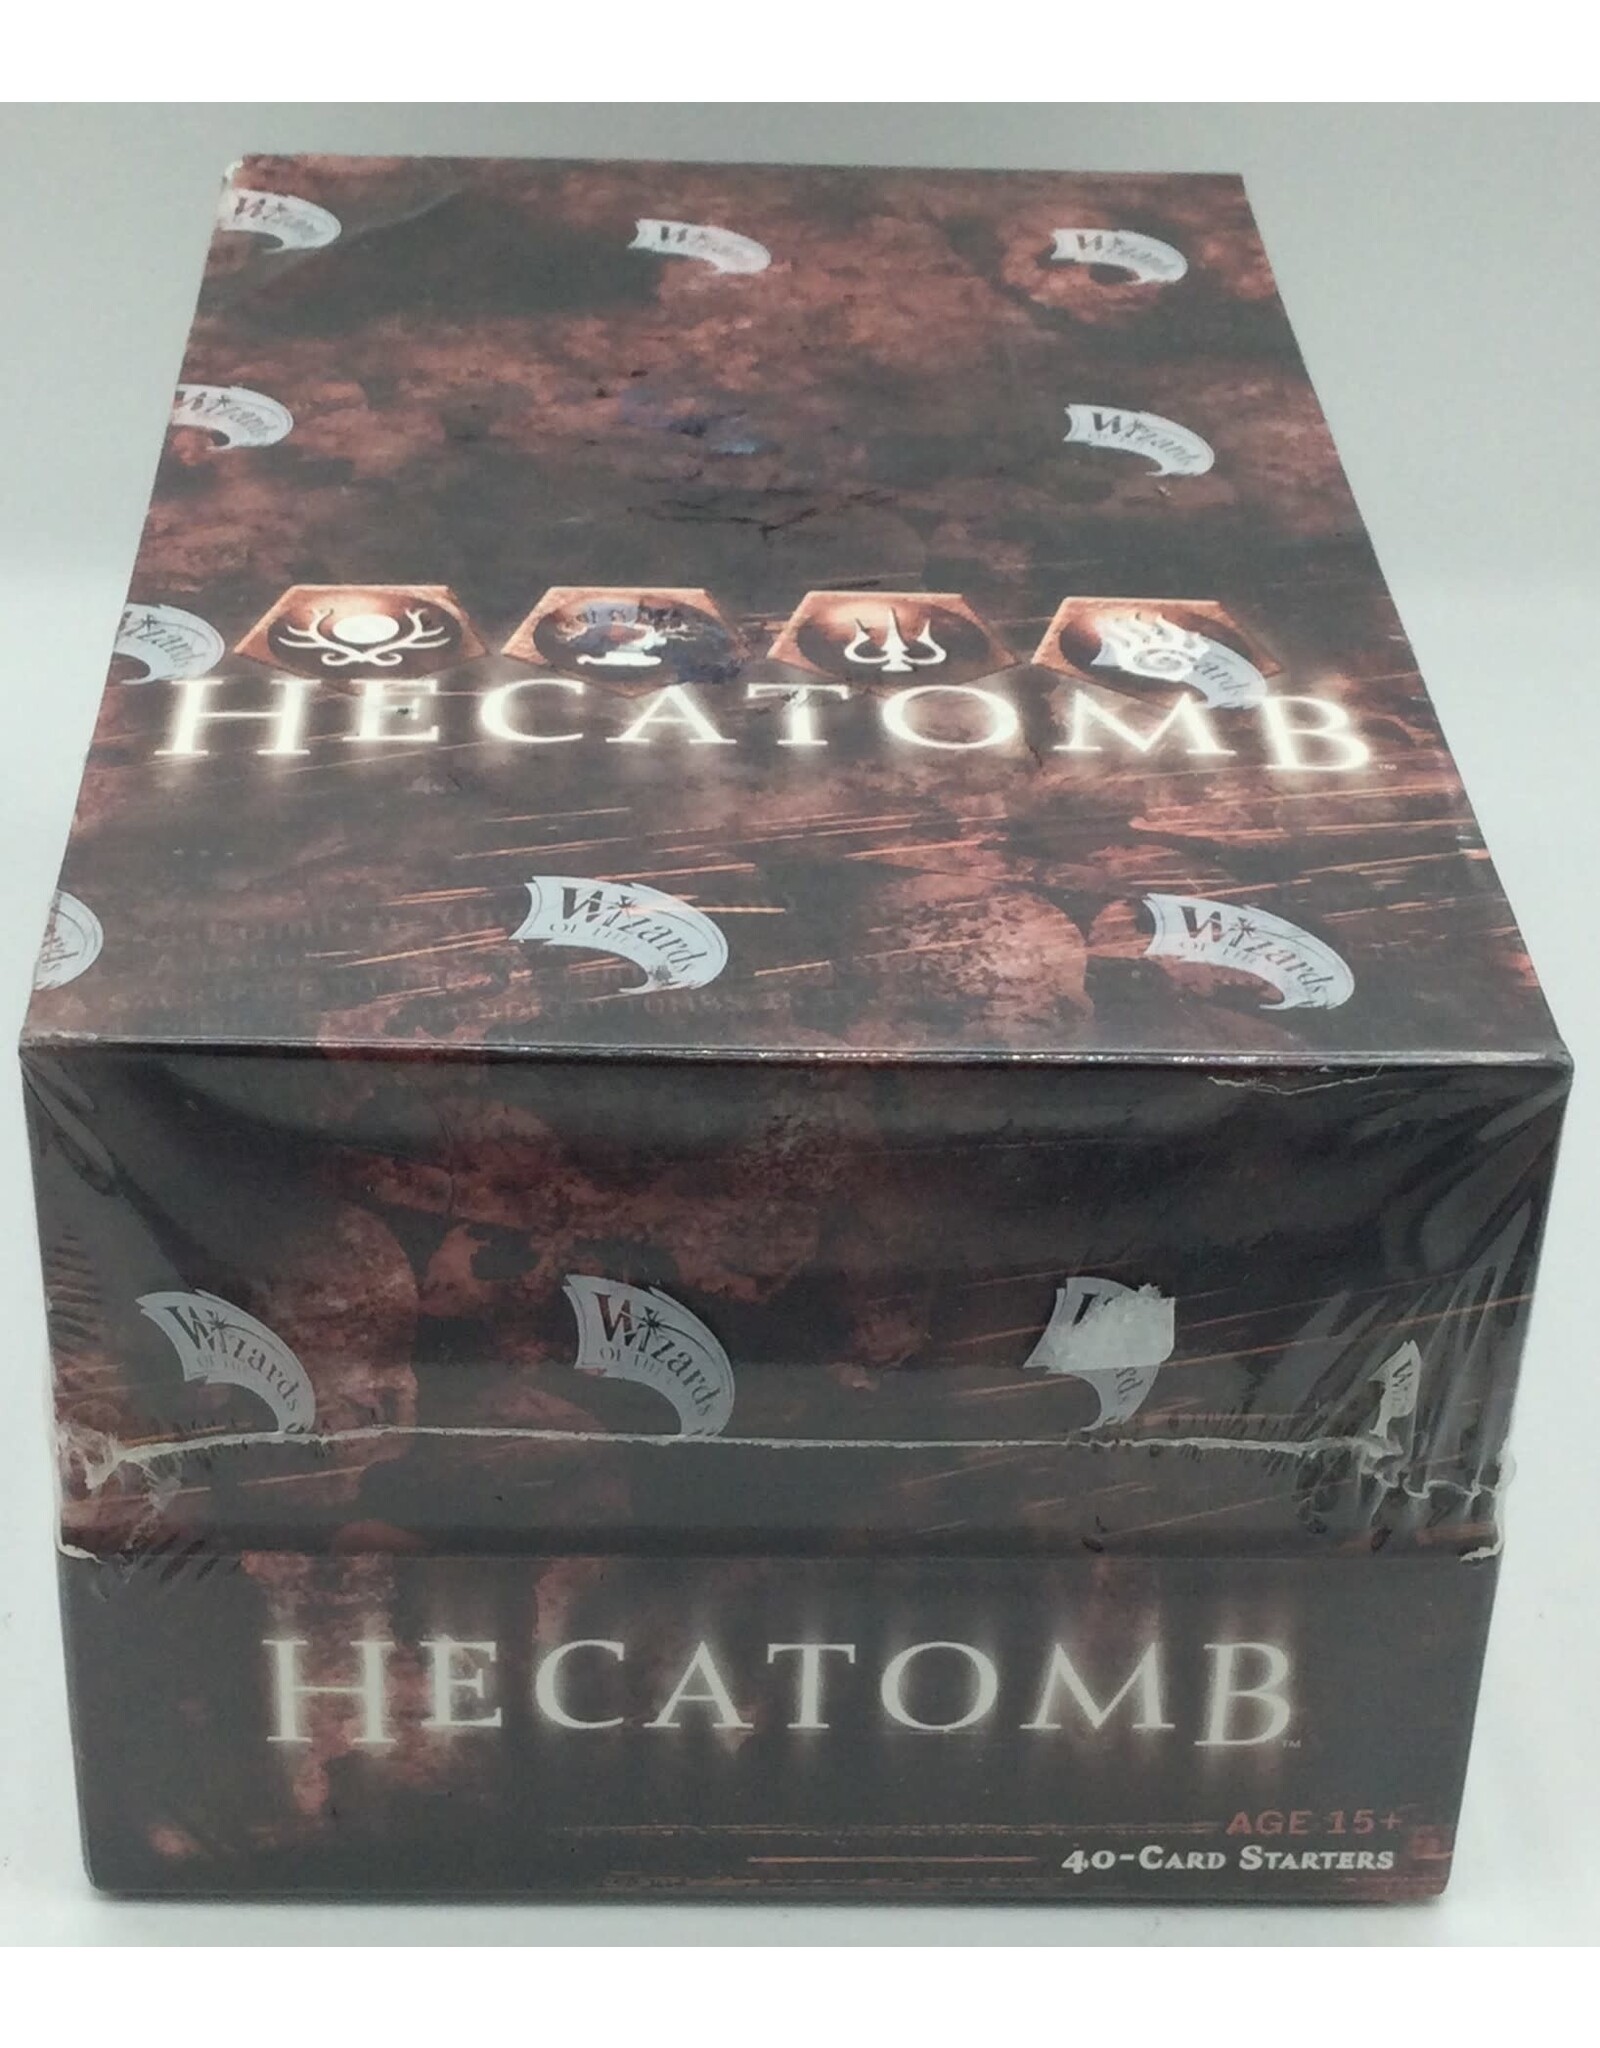 Misc CCGS Hecatomb Trading card game Starter Decks (Sealed Box)